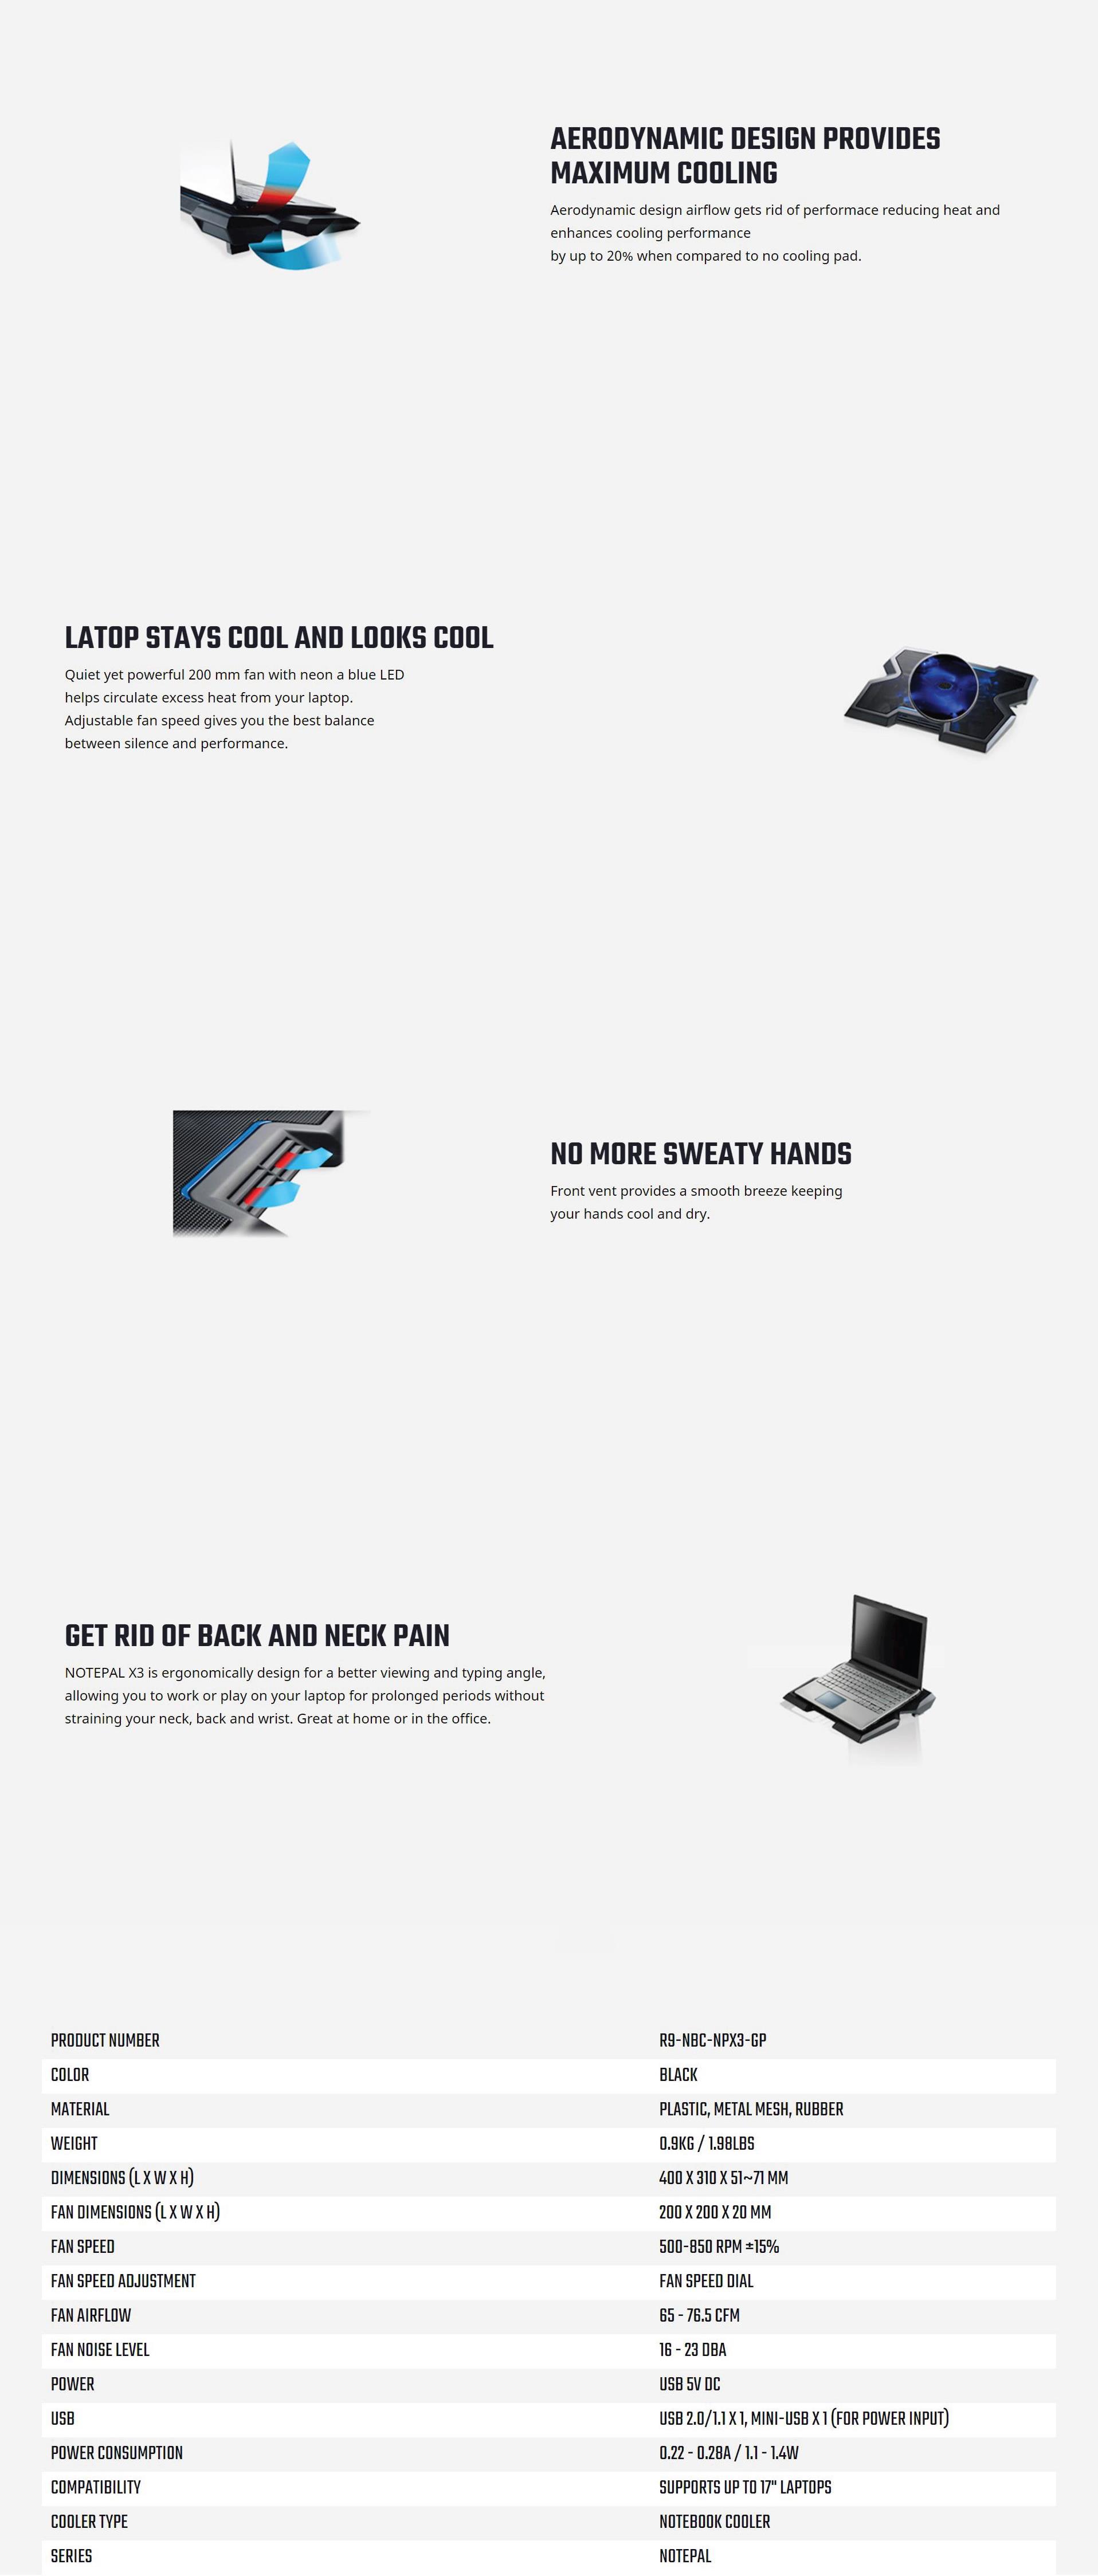 A large marketing image providing additional information about the product Cooler Master Notepal X3  - Additional alt info not provided